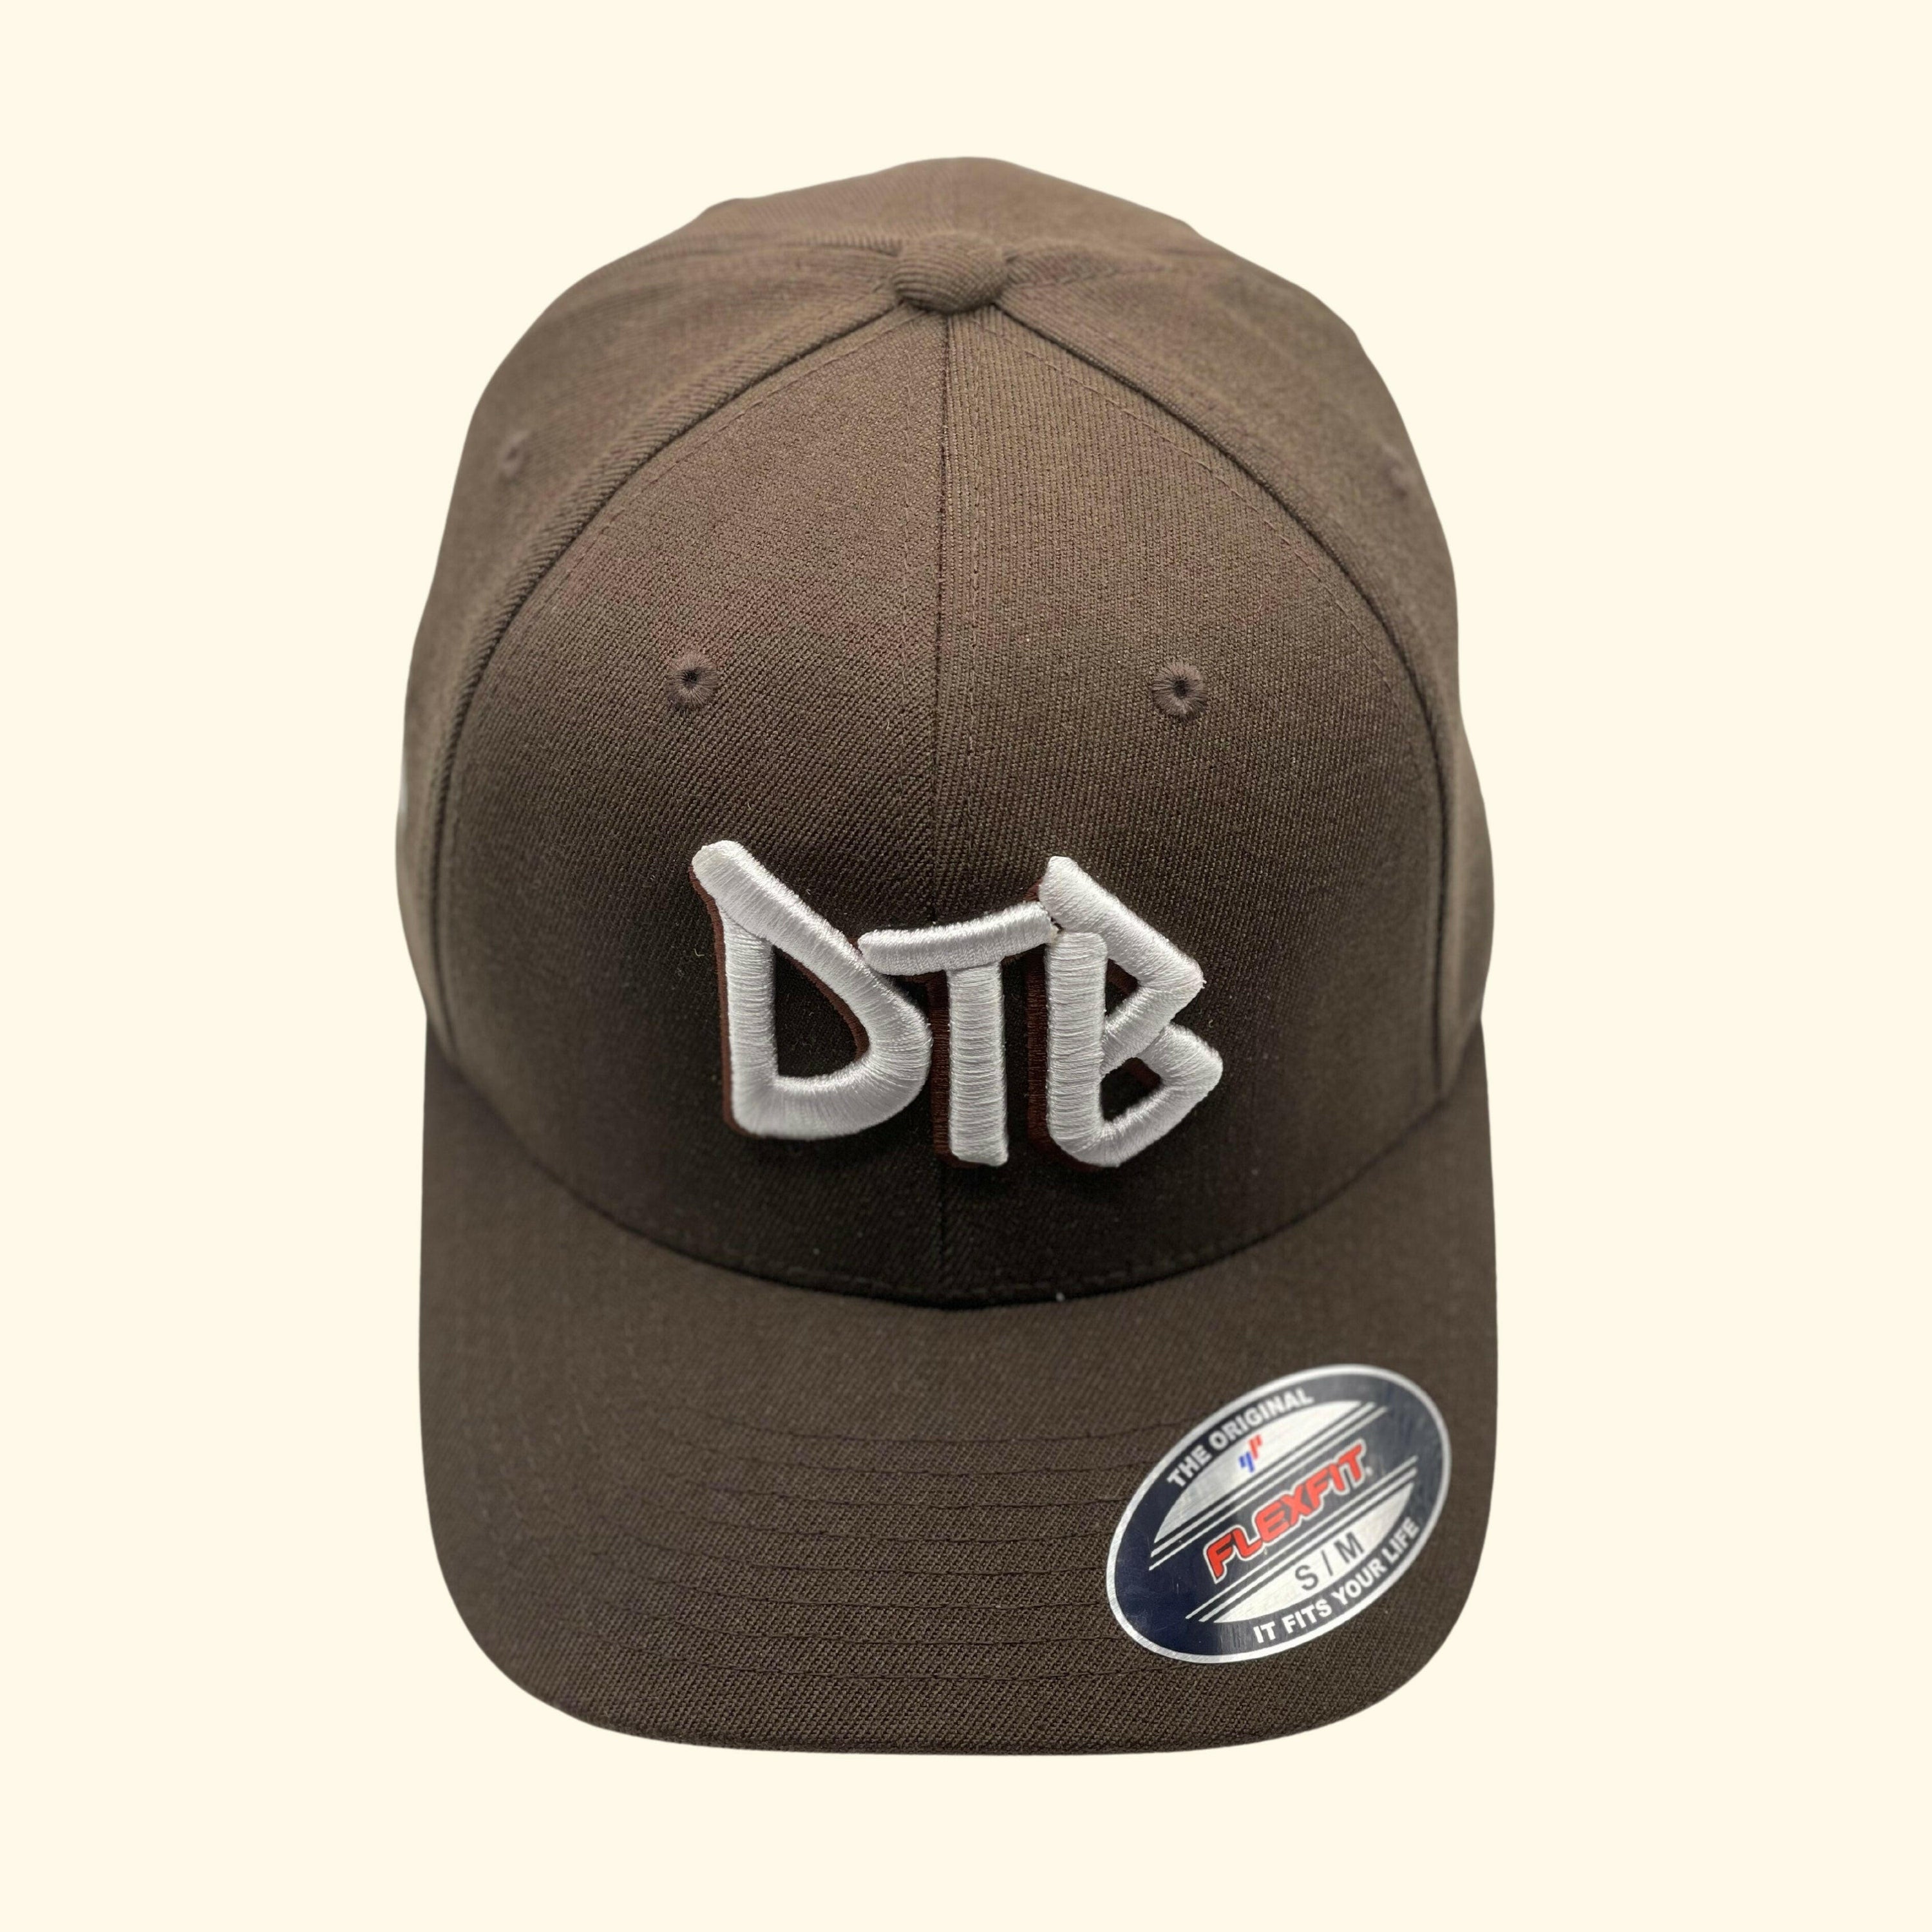 DTB Embroidered Badge Brown Flex Fit Cap